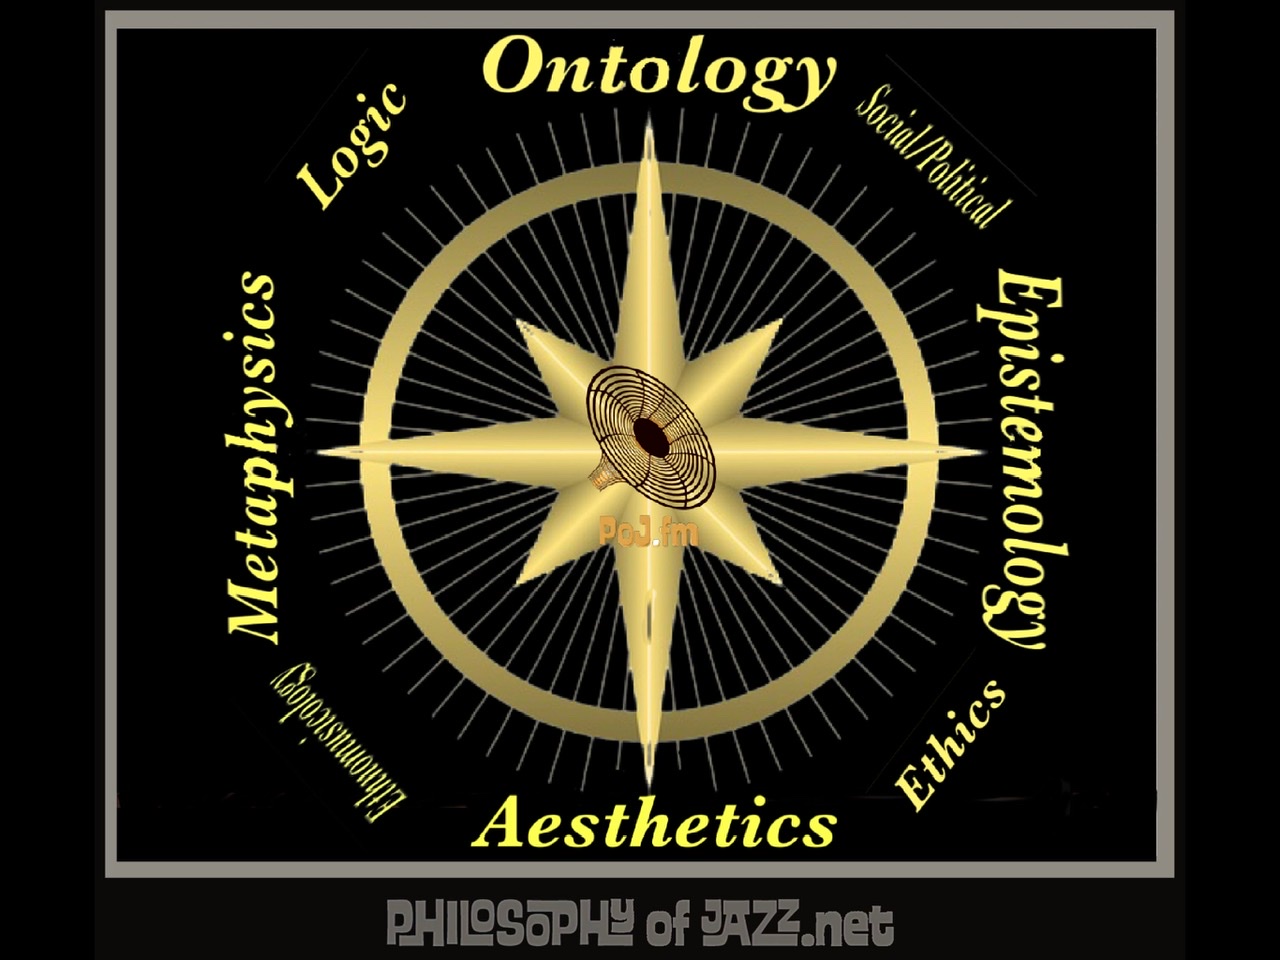 A black framed graphic of a golden spiked compass with names of fields of philosophy located at central compass points with a PoJ.fm logo at the center.